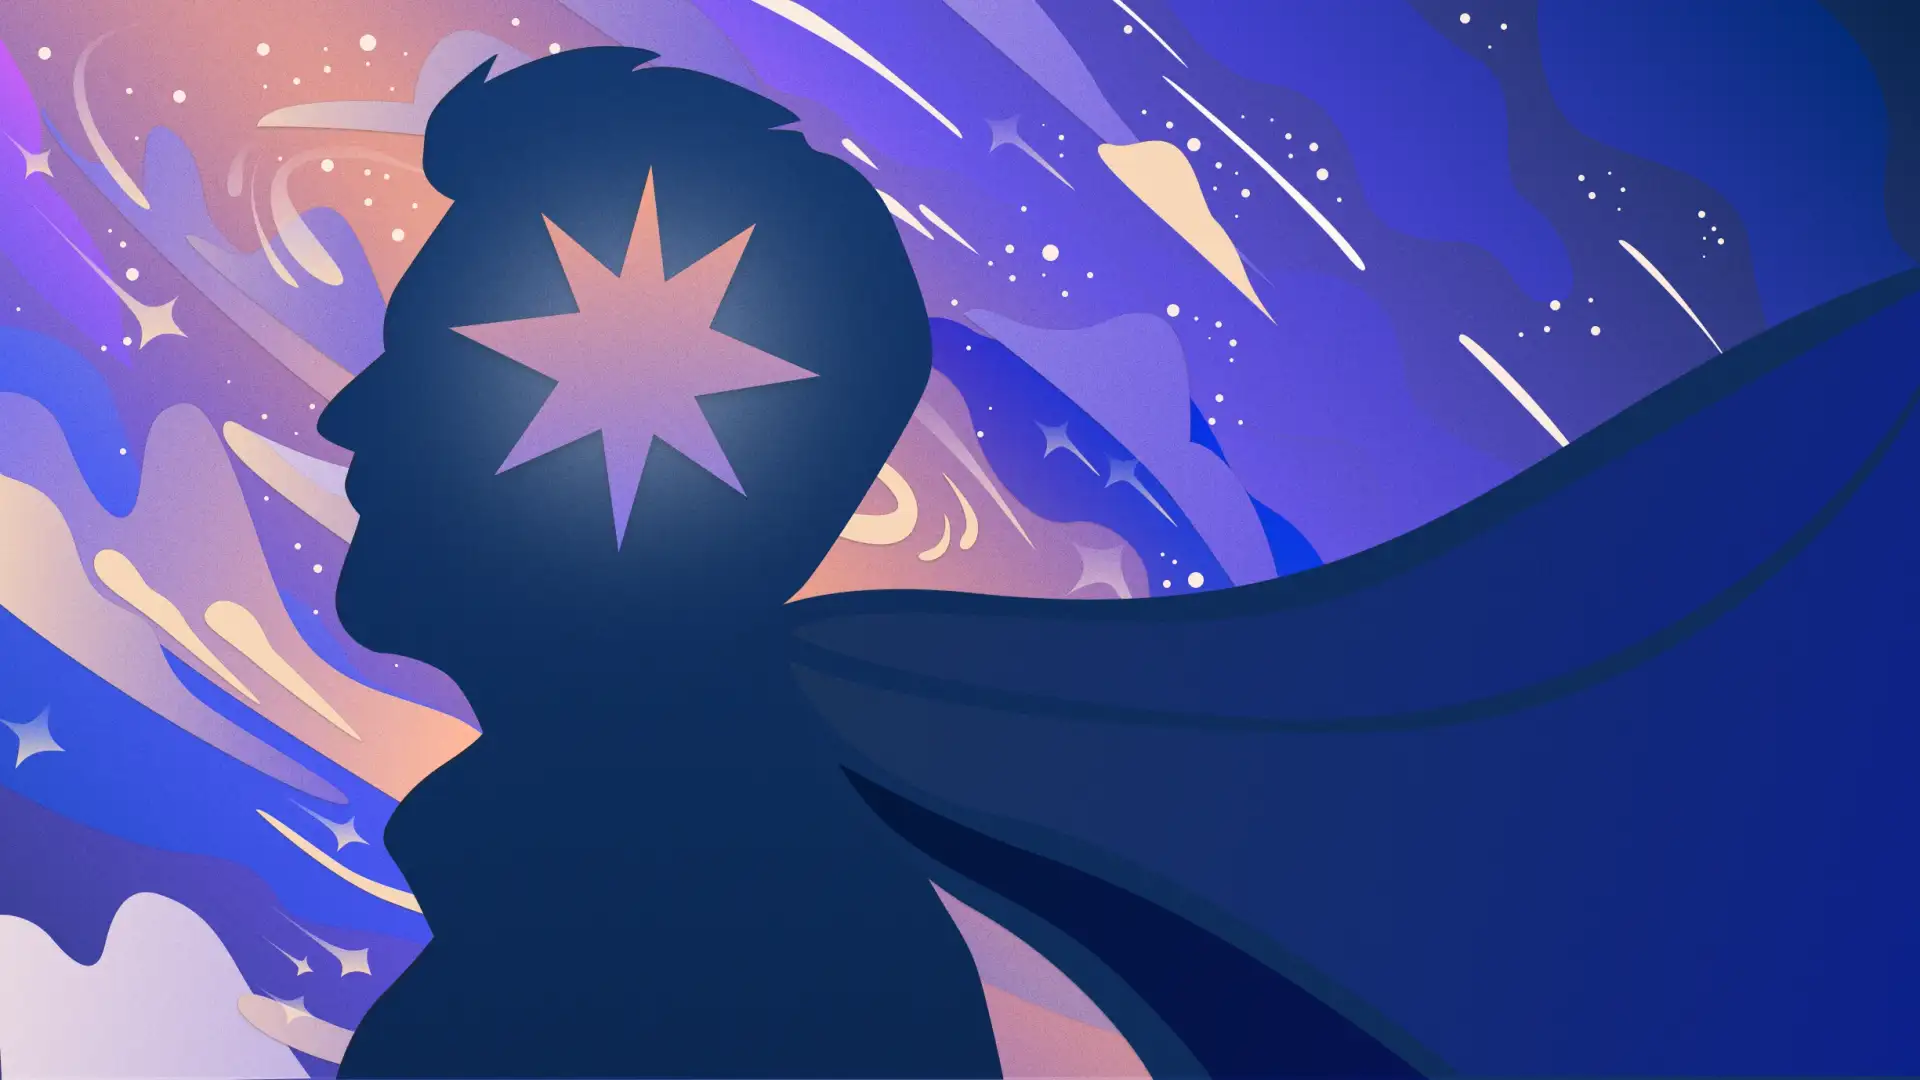 A spark shines from the mind of a caped silhouette against a cosmic background.